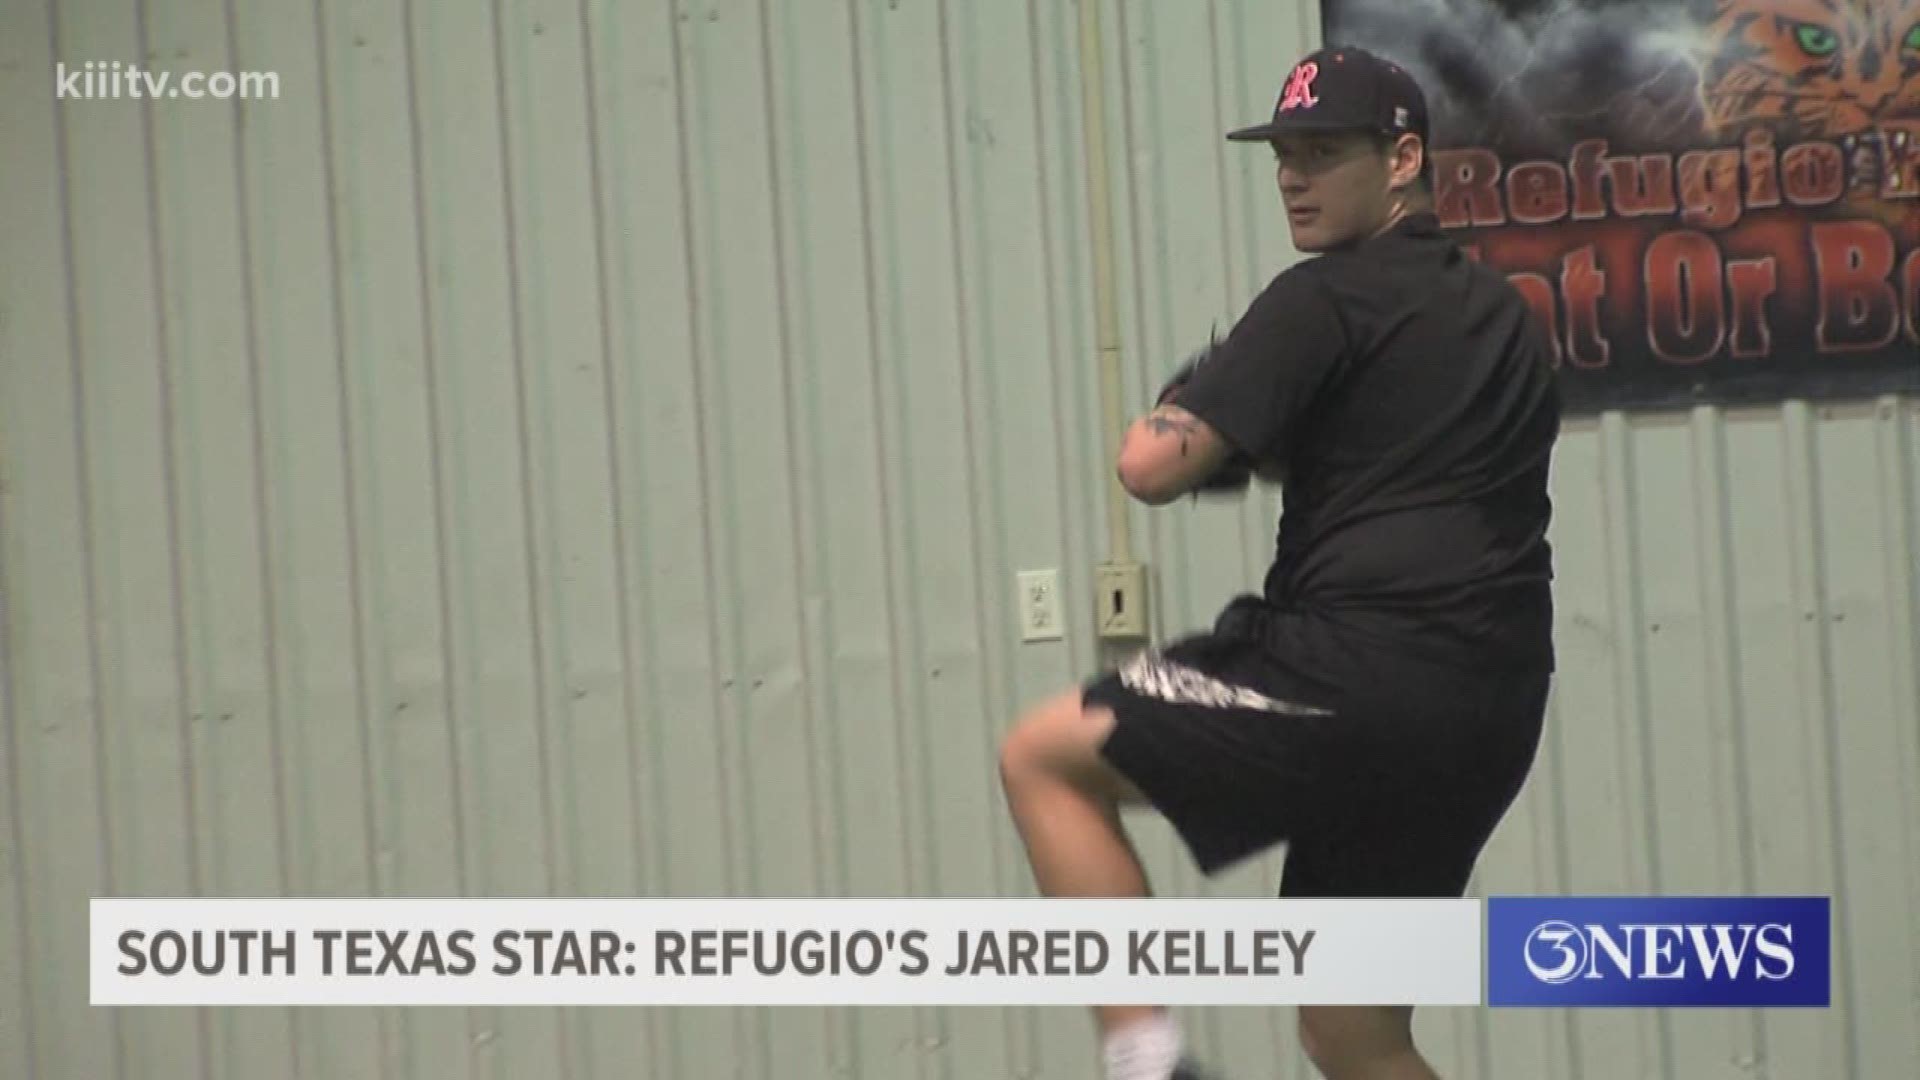 Refugio's Jared Kelley is ranked as the No. 7 prospect in the 2020 MLB draft by MLB Pipeline.